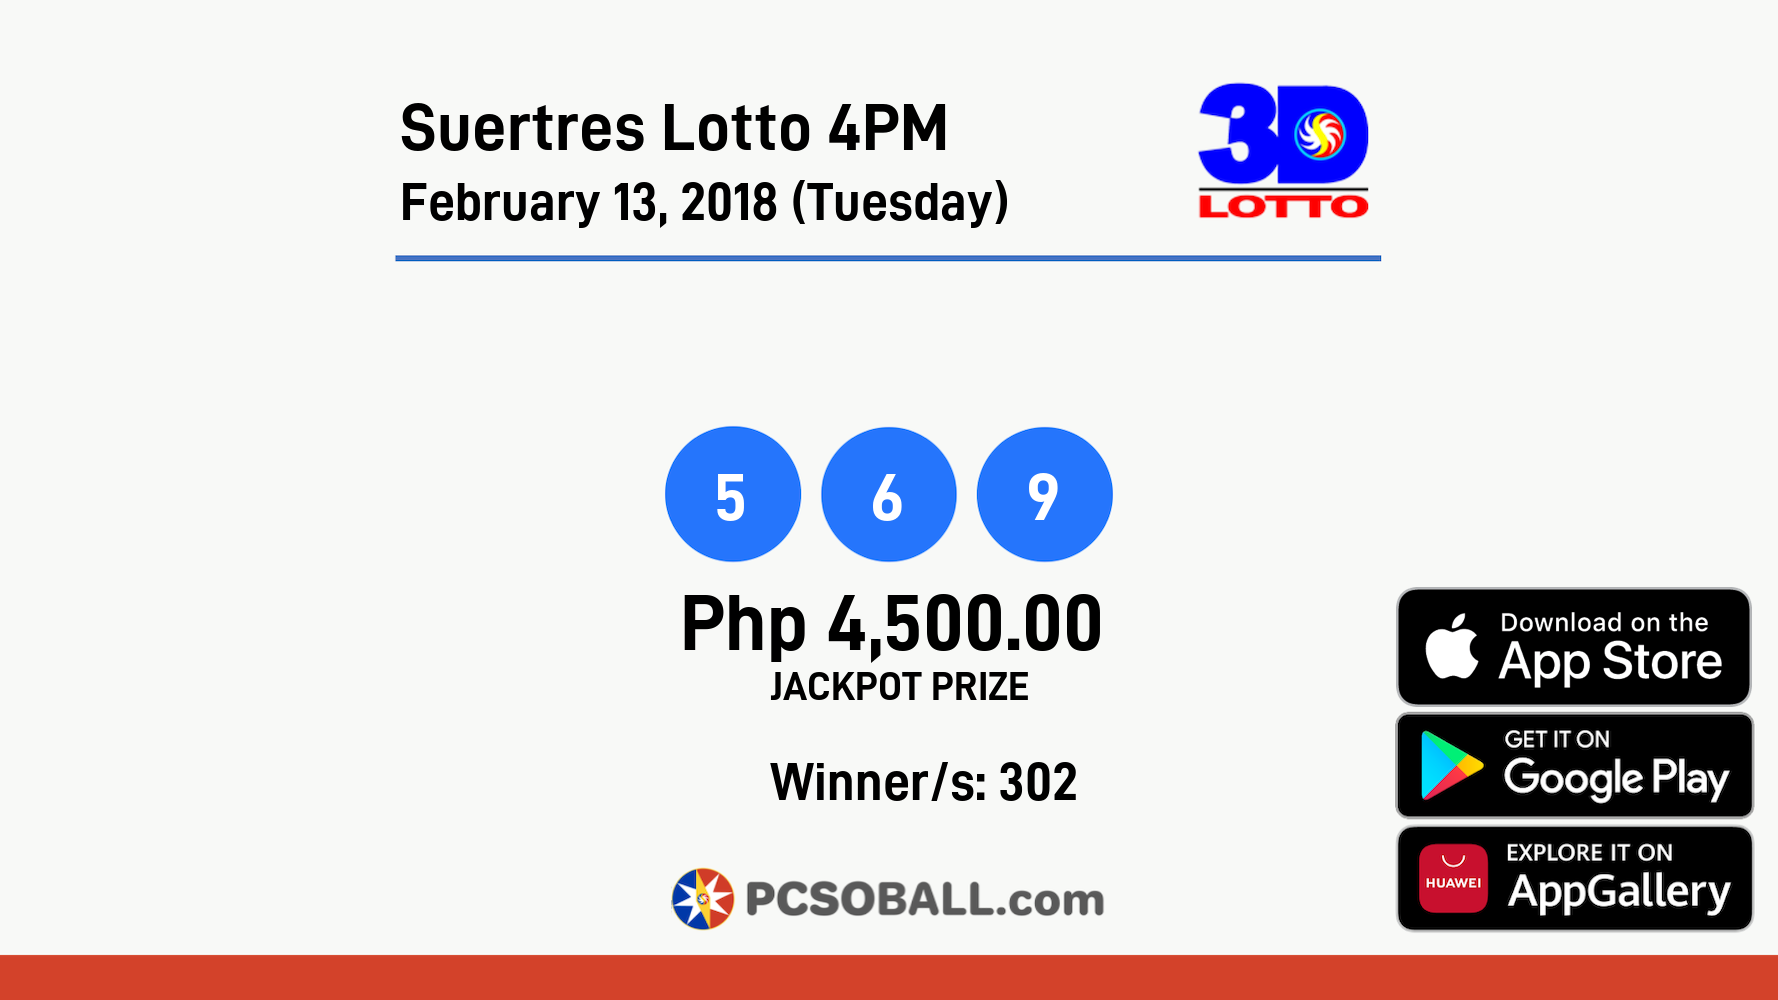 Suertres Lotto 4PM February 13, 2018 (Tuesday) Result